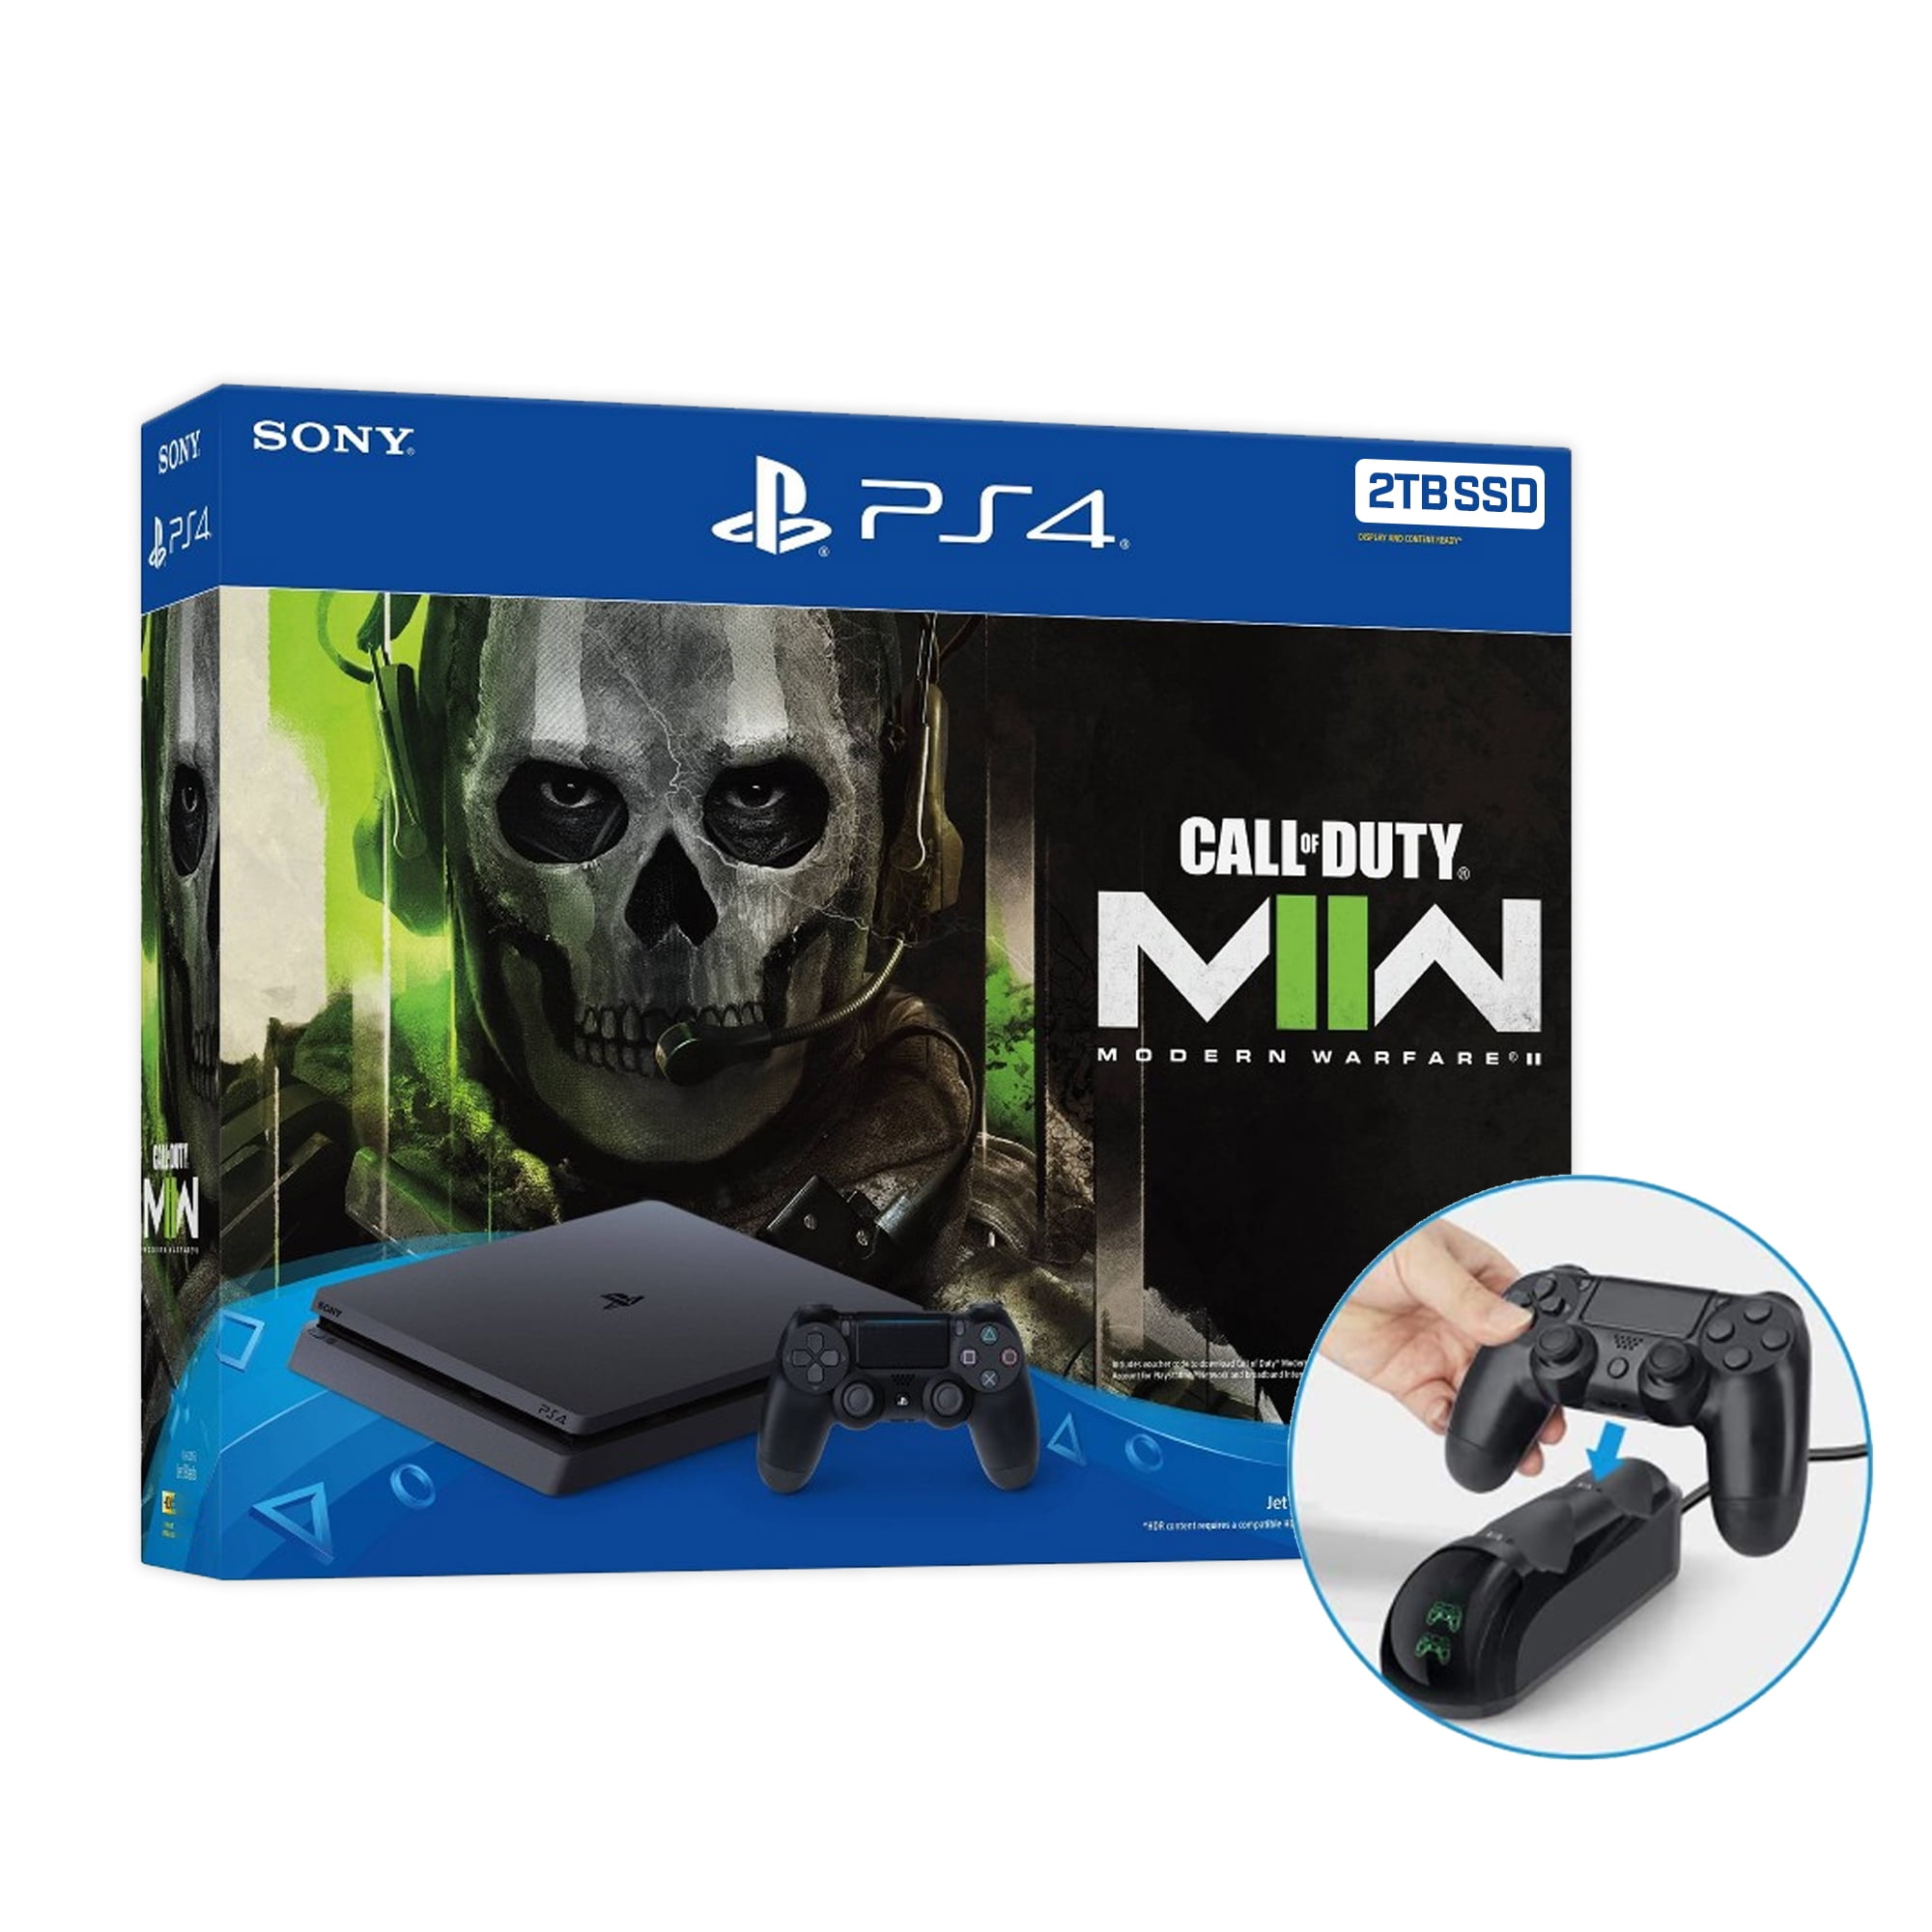 Sony PlayStation 4 Slim Call of Duty Modern Warfare II Bundle 1TB PS4  Gaming Console, Jet Black, with Mytrix Dual Controller Fast Charger